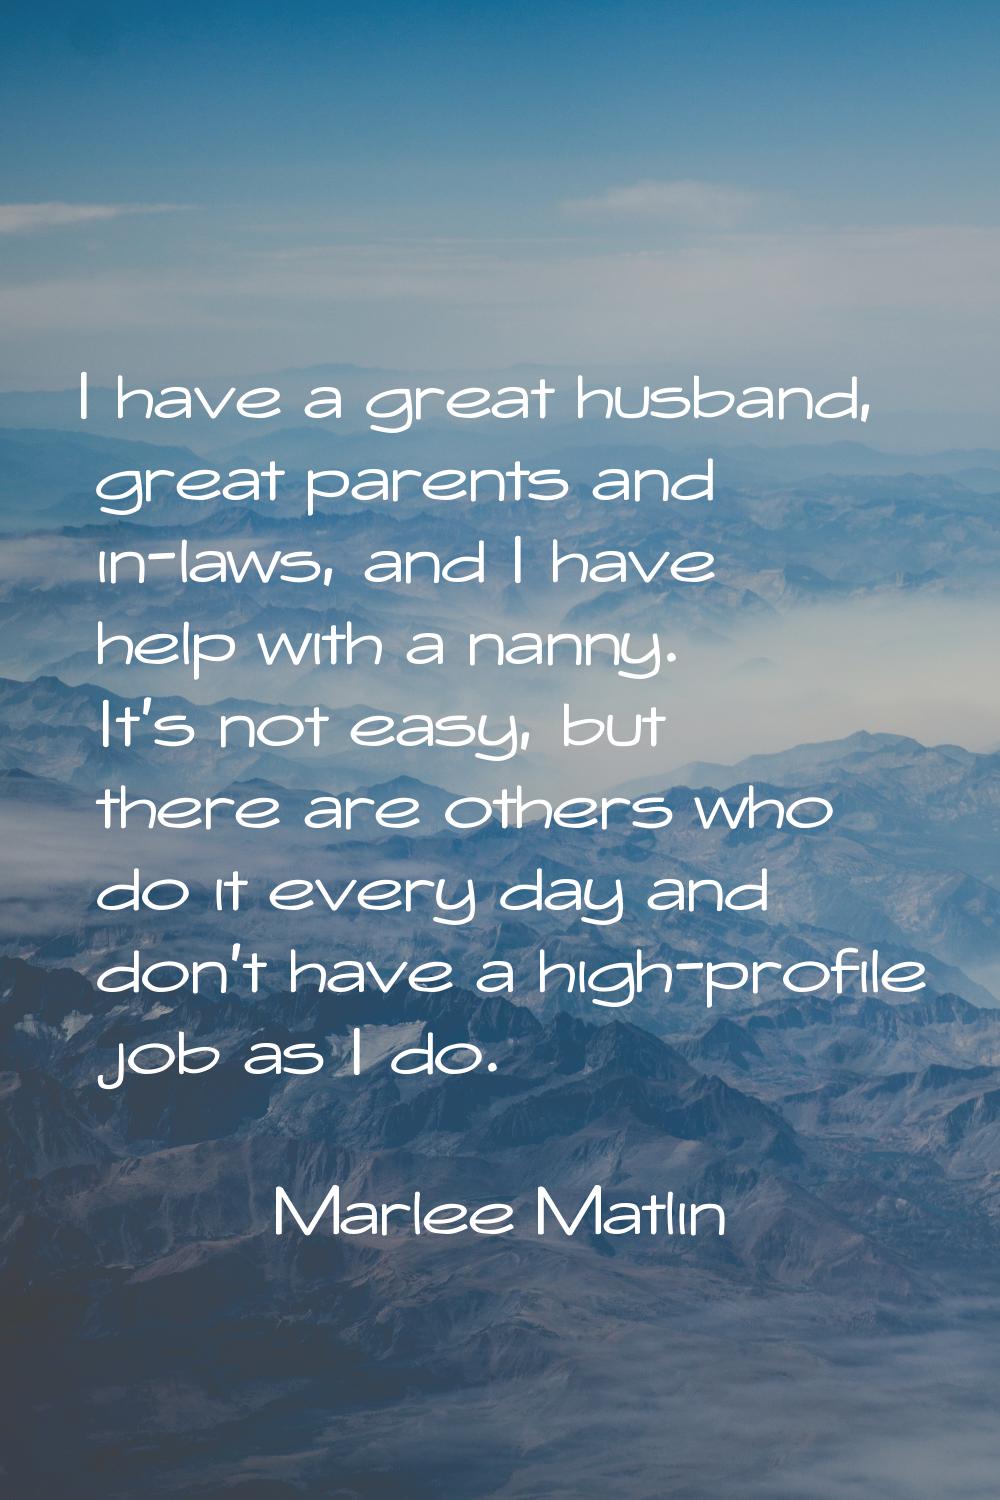 I have a great husband, great parents and in-laws, and I have help with a nanny. It's not easy, but